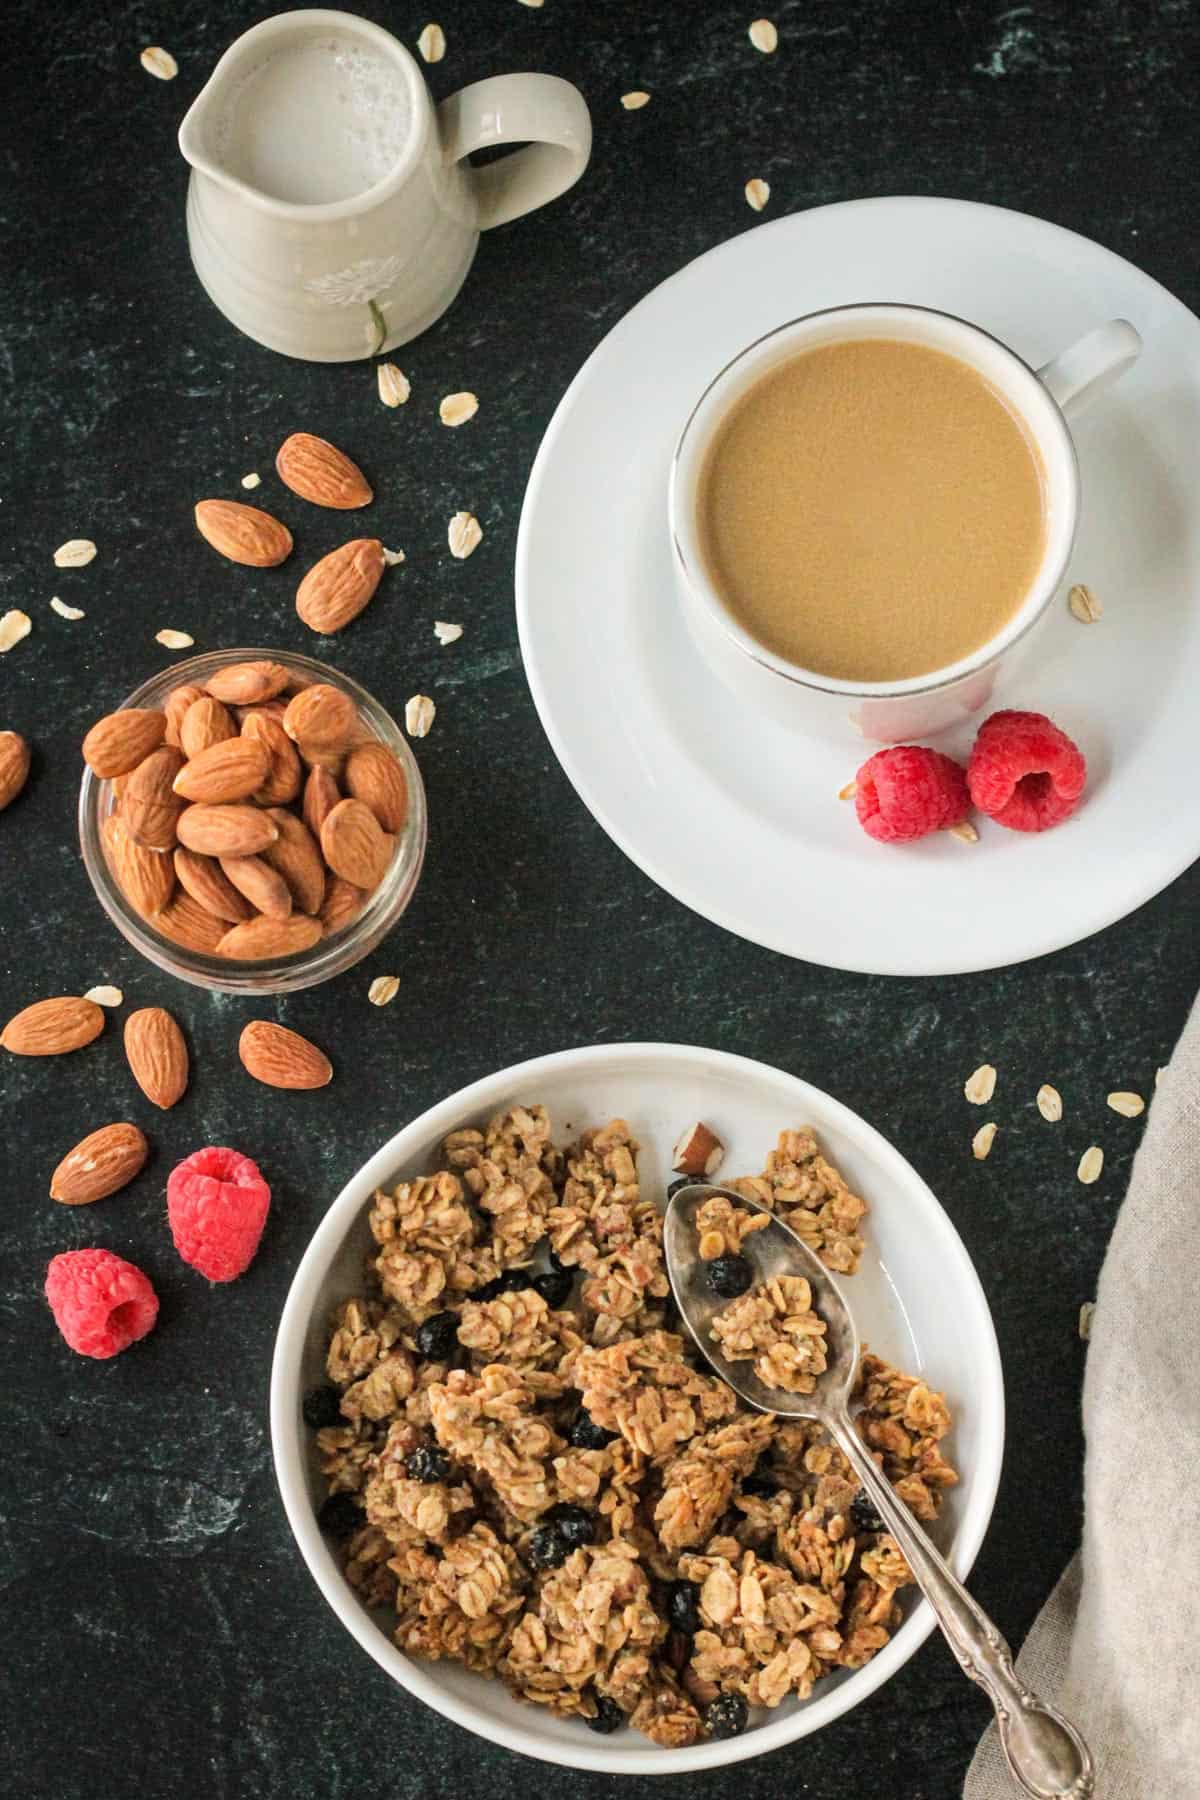 Bowl of almond granola next to a cup of coffee and a small jar of almonds.